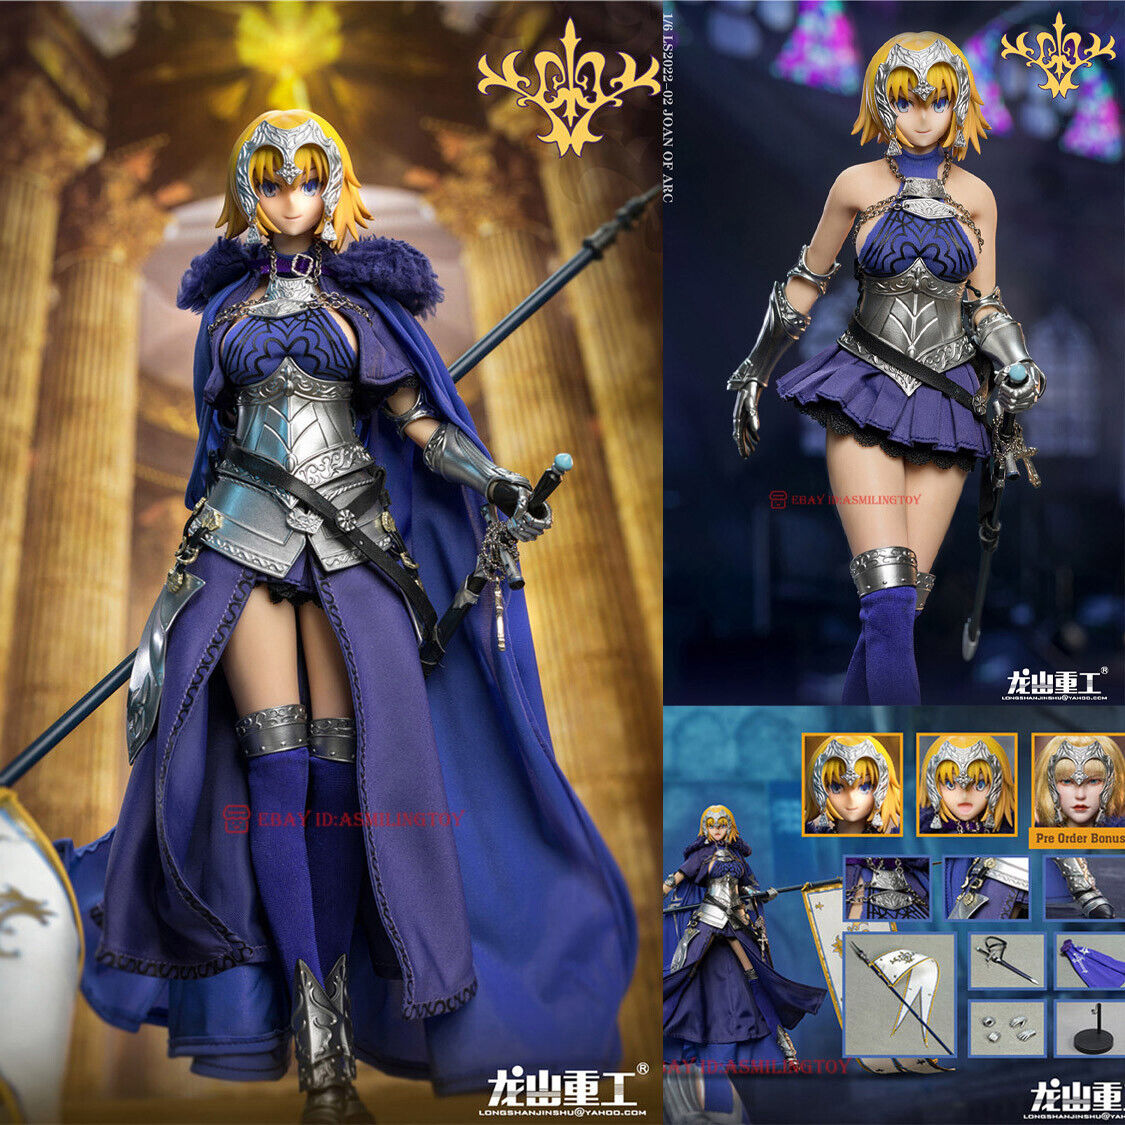 SL2022-02 1/6 Fate/Grand Order FGO Joan of arc Action Figure Model In Stock NEW